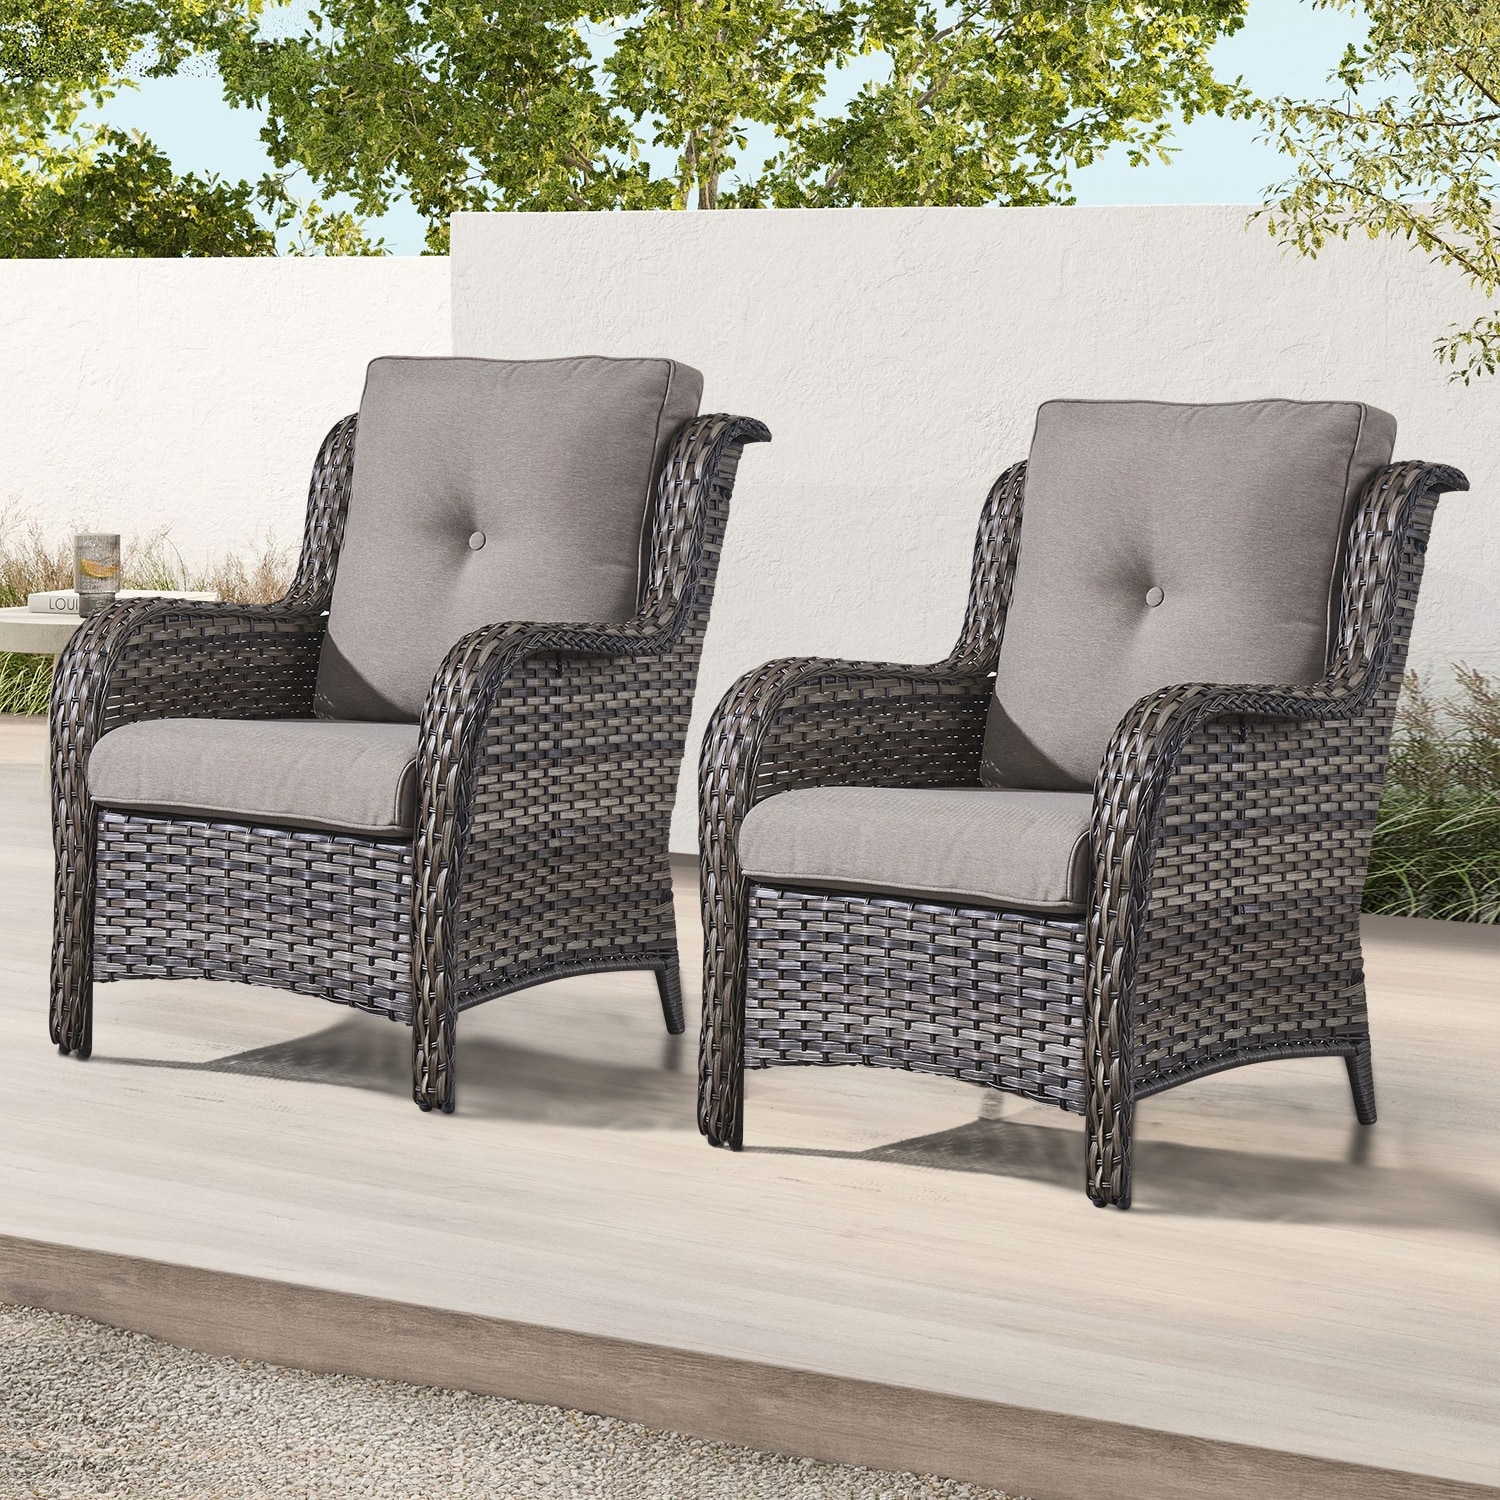 Outdoor Patio Furniture 2-piece Wicker Chair Wicker Club Chairs